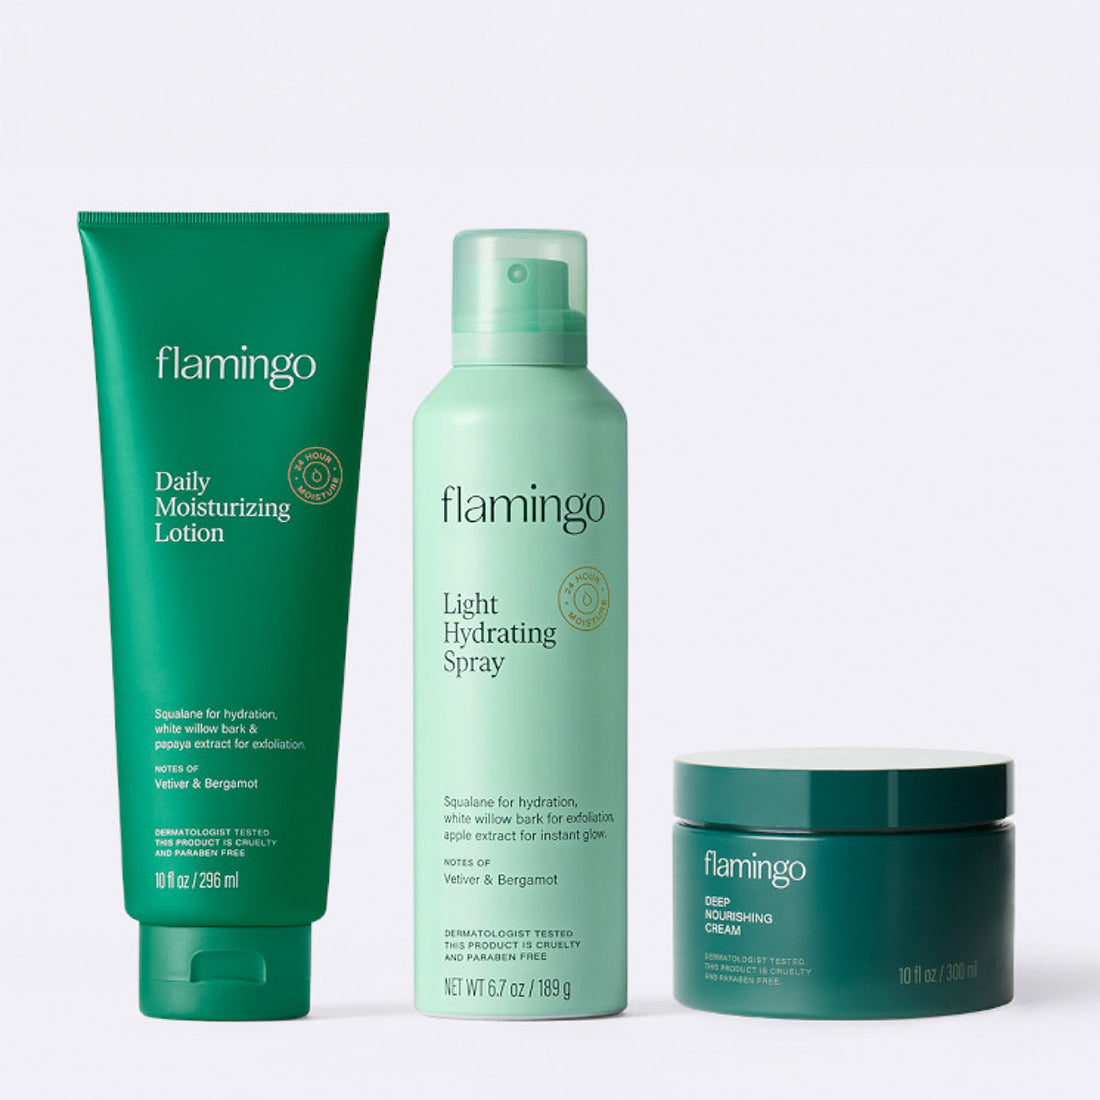 Flamingo's Body Moisture Trio featuring a green tube of Daily Moisturizing Lotion, a pale green can of Light Hydrating Spray, and a dark green jar of Deep Nourishing Cream all side by side